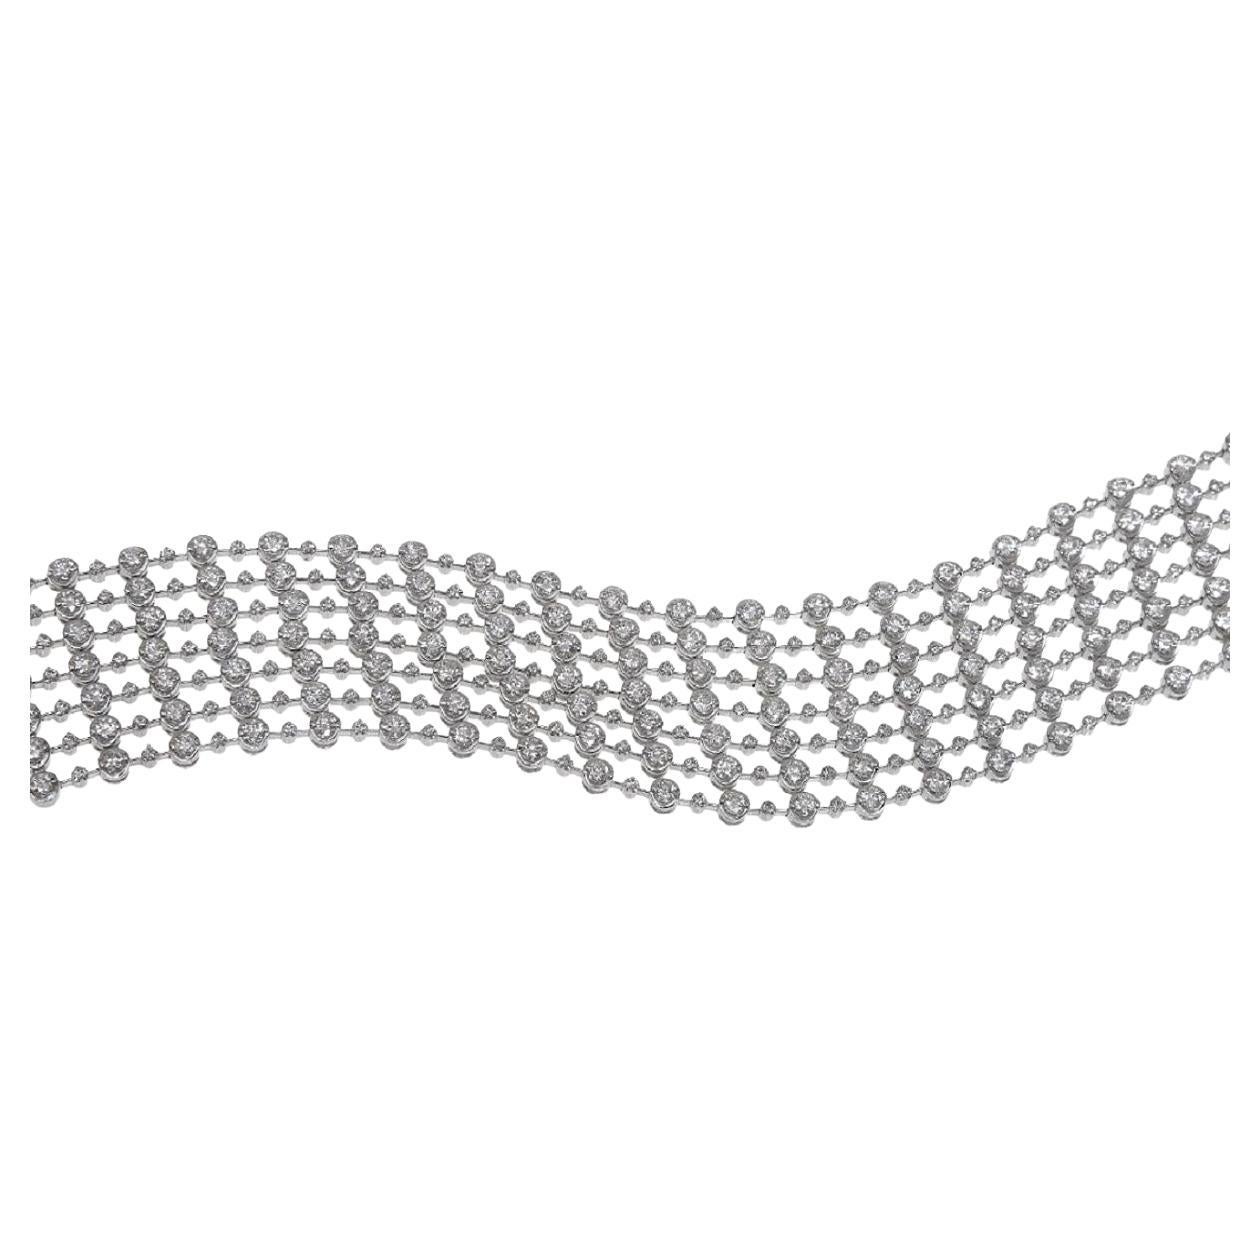 Diana M. 18kt white gold seven row bracelet featuring 13.00 cts of round diamond